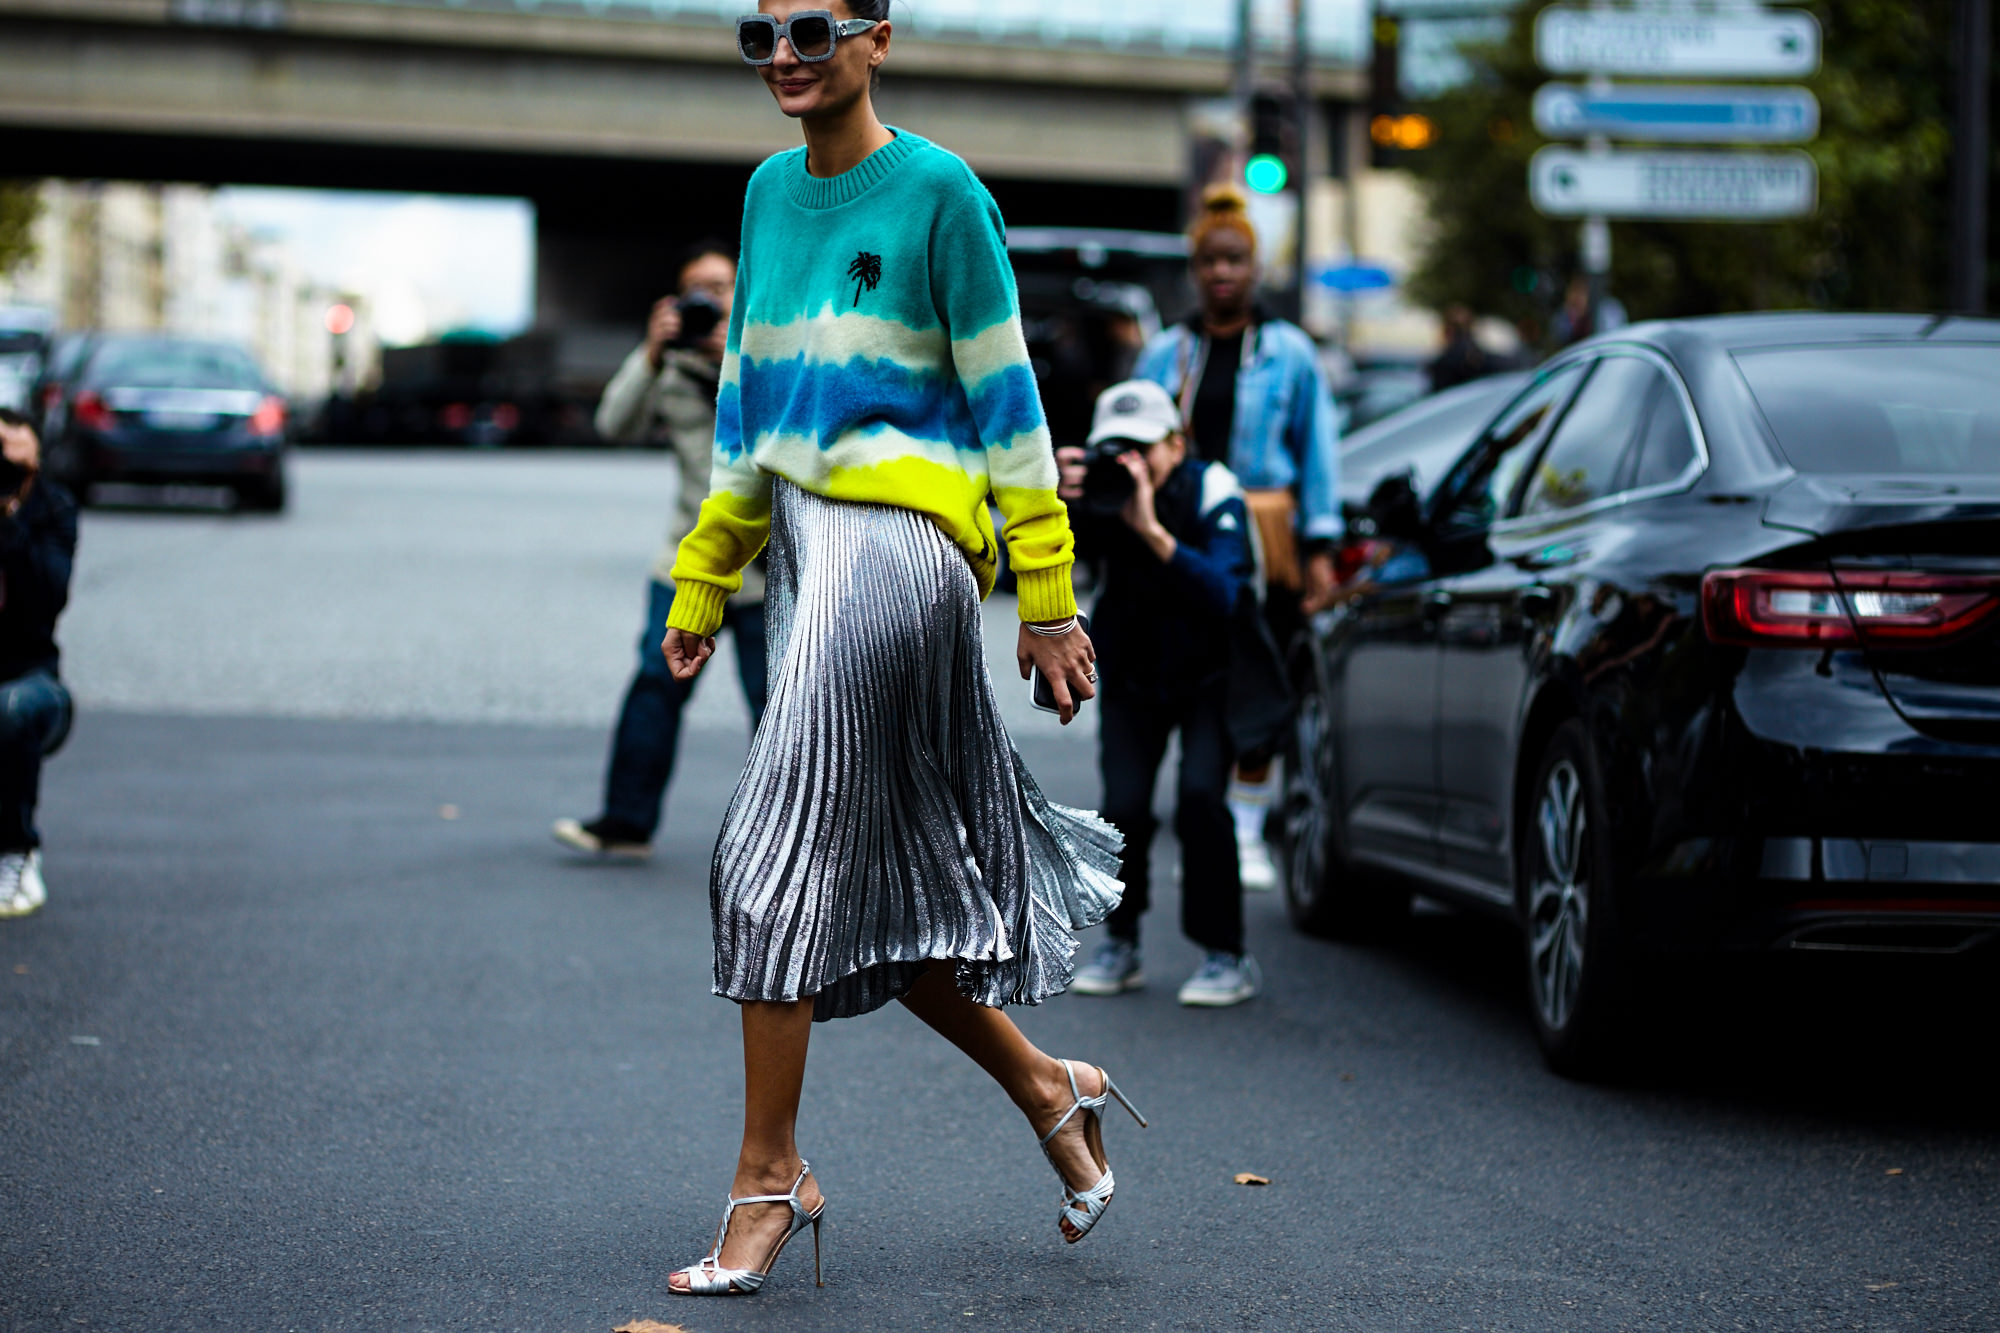 PFW Spring-Summer 2017 street style: Giovanna Battaglia Engelbert wearing a graphic sweated and silver pleated skirt after a show in Paris.